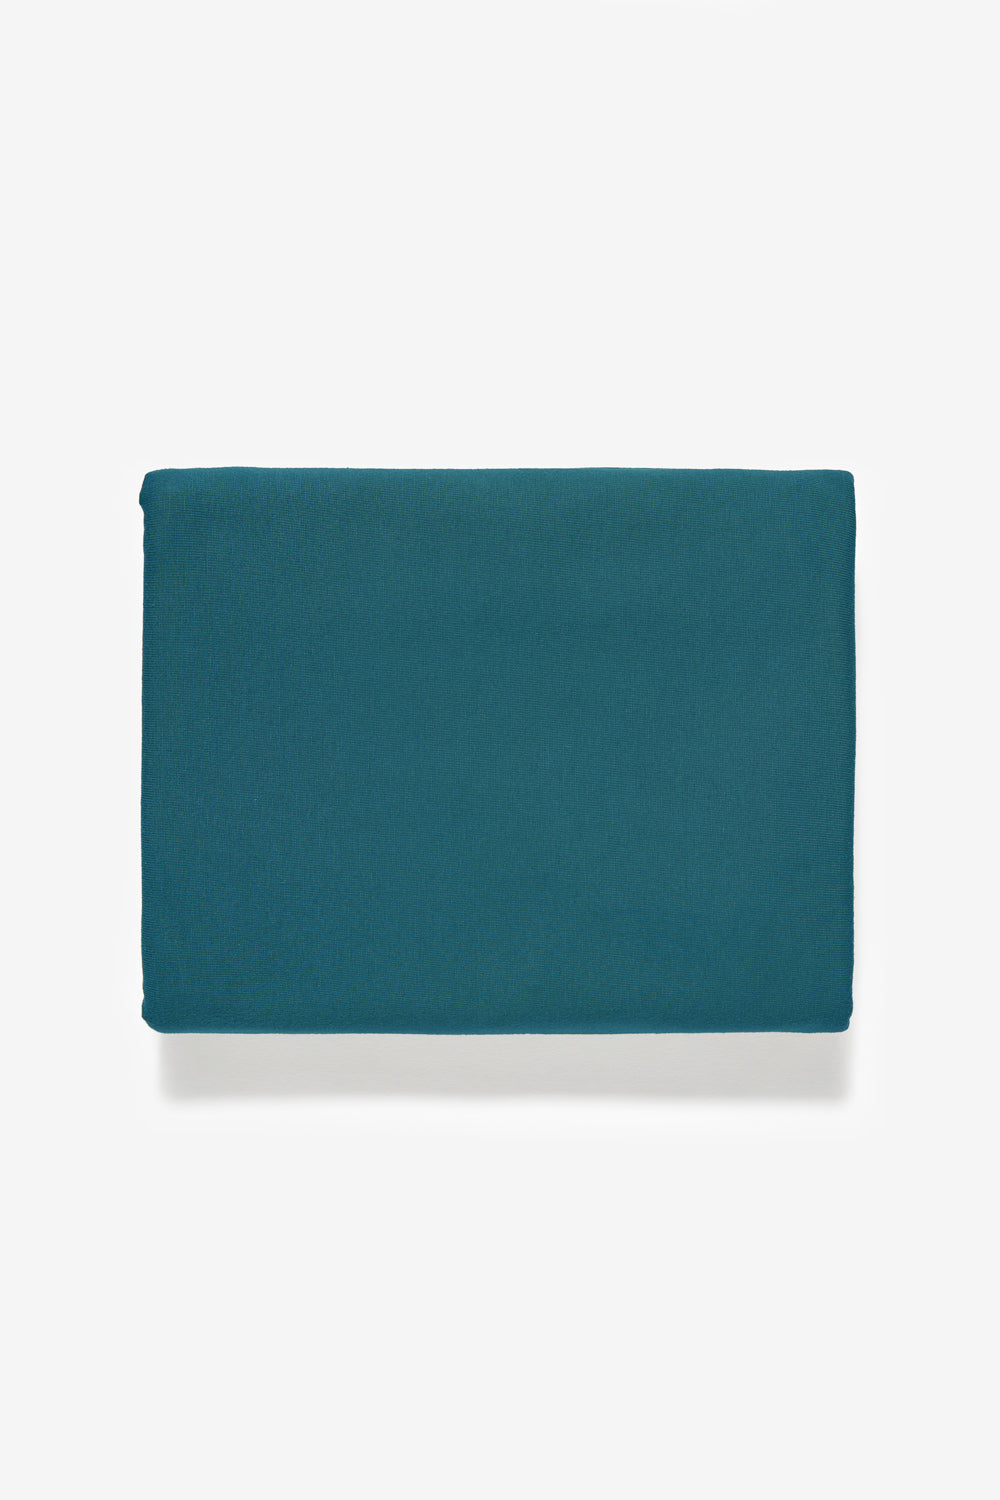 The School of Making Teal fabric swatch. Made with 100% organic cotton.